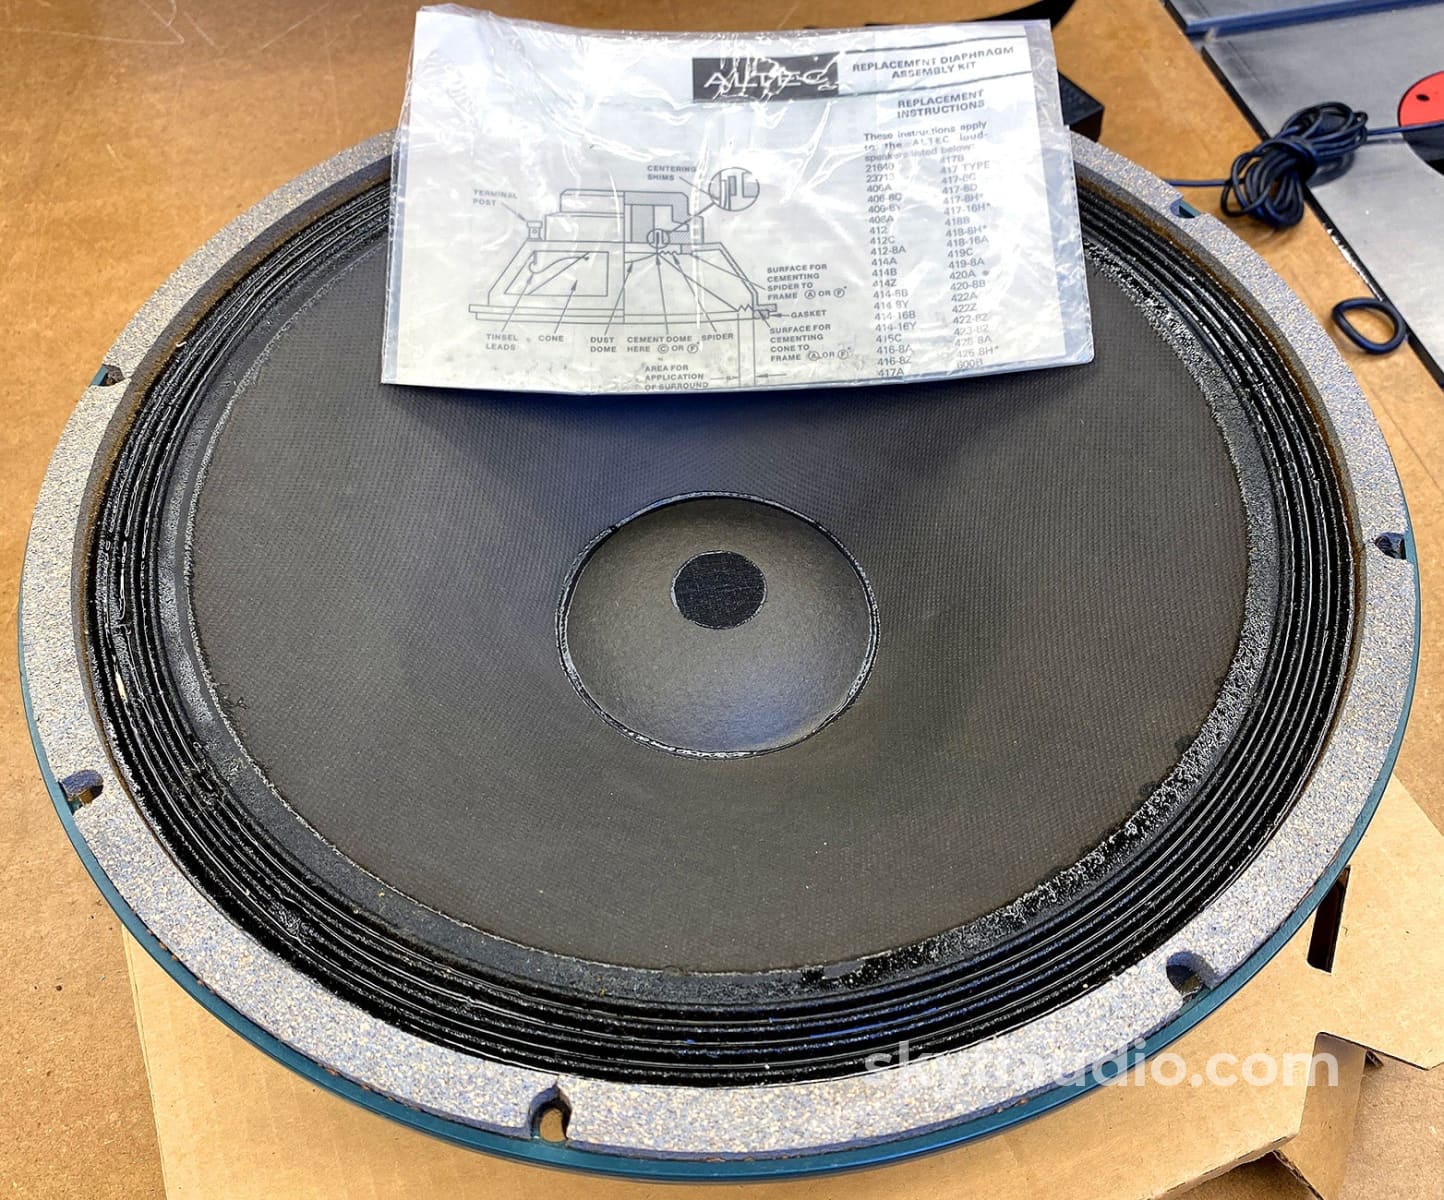 Altec Lansing 416Z Woofer With Manual And Box Survivor! Speakers